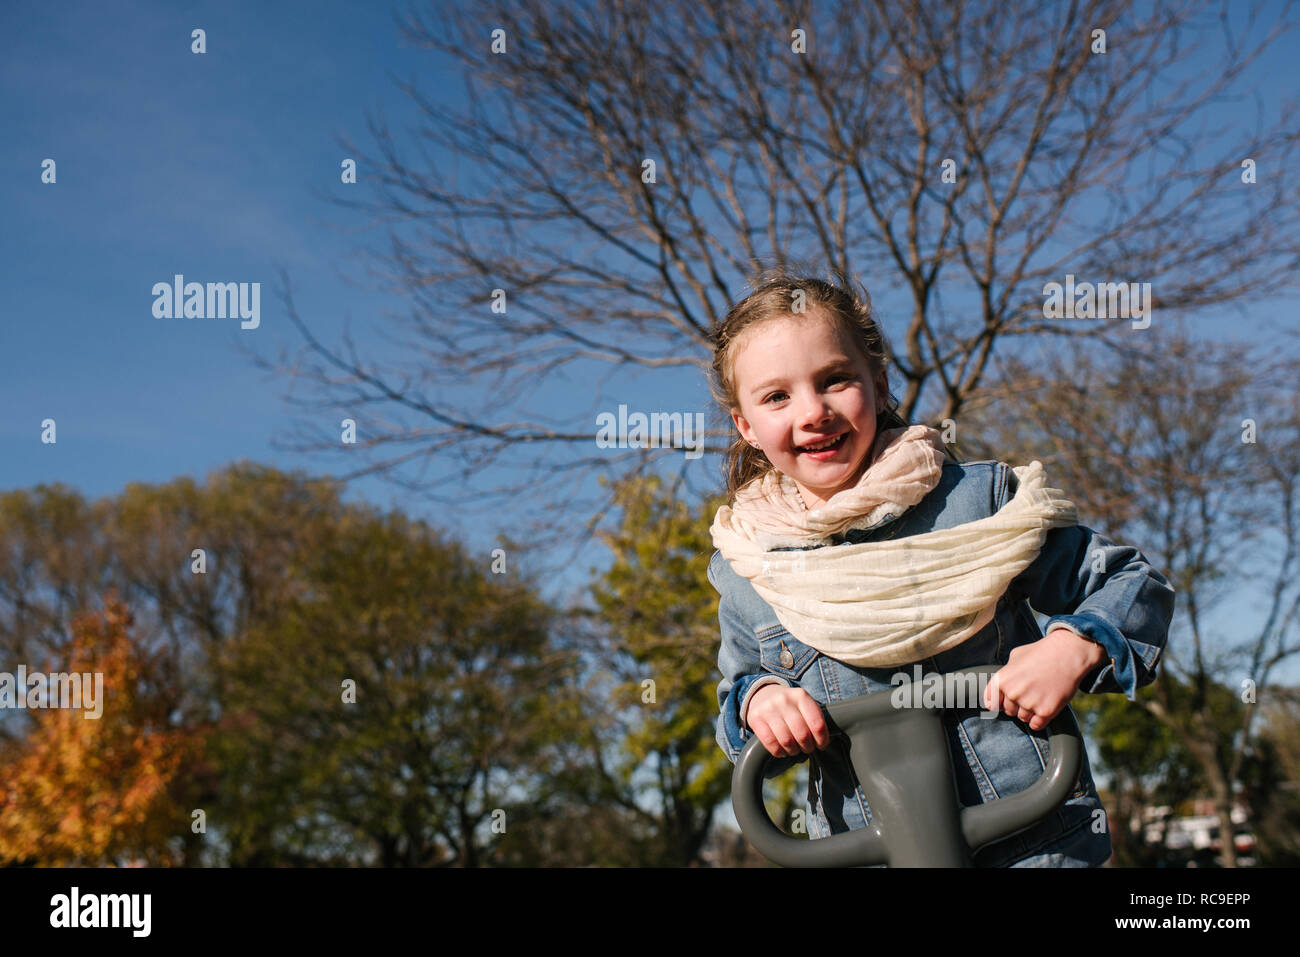 Little girl playing in park Stock Photo